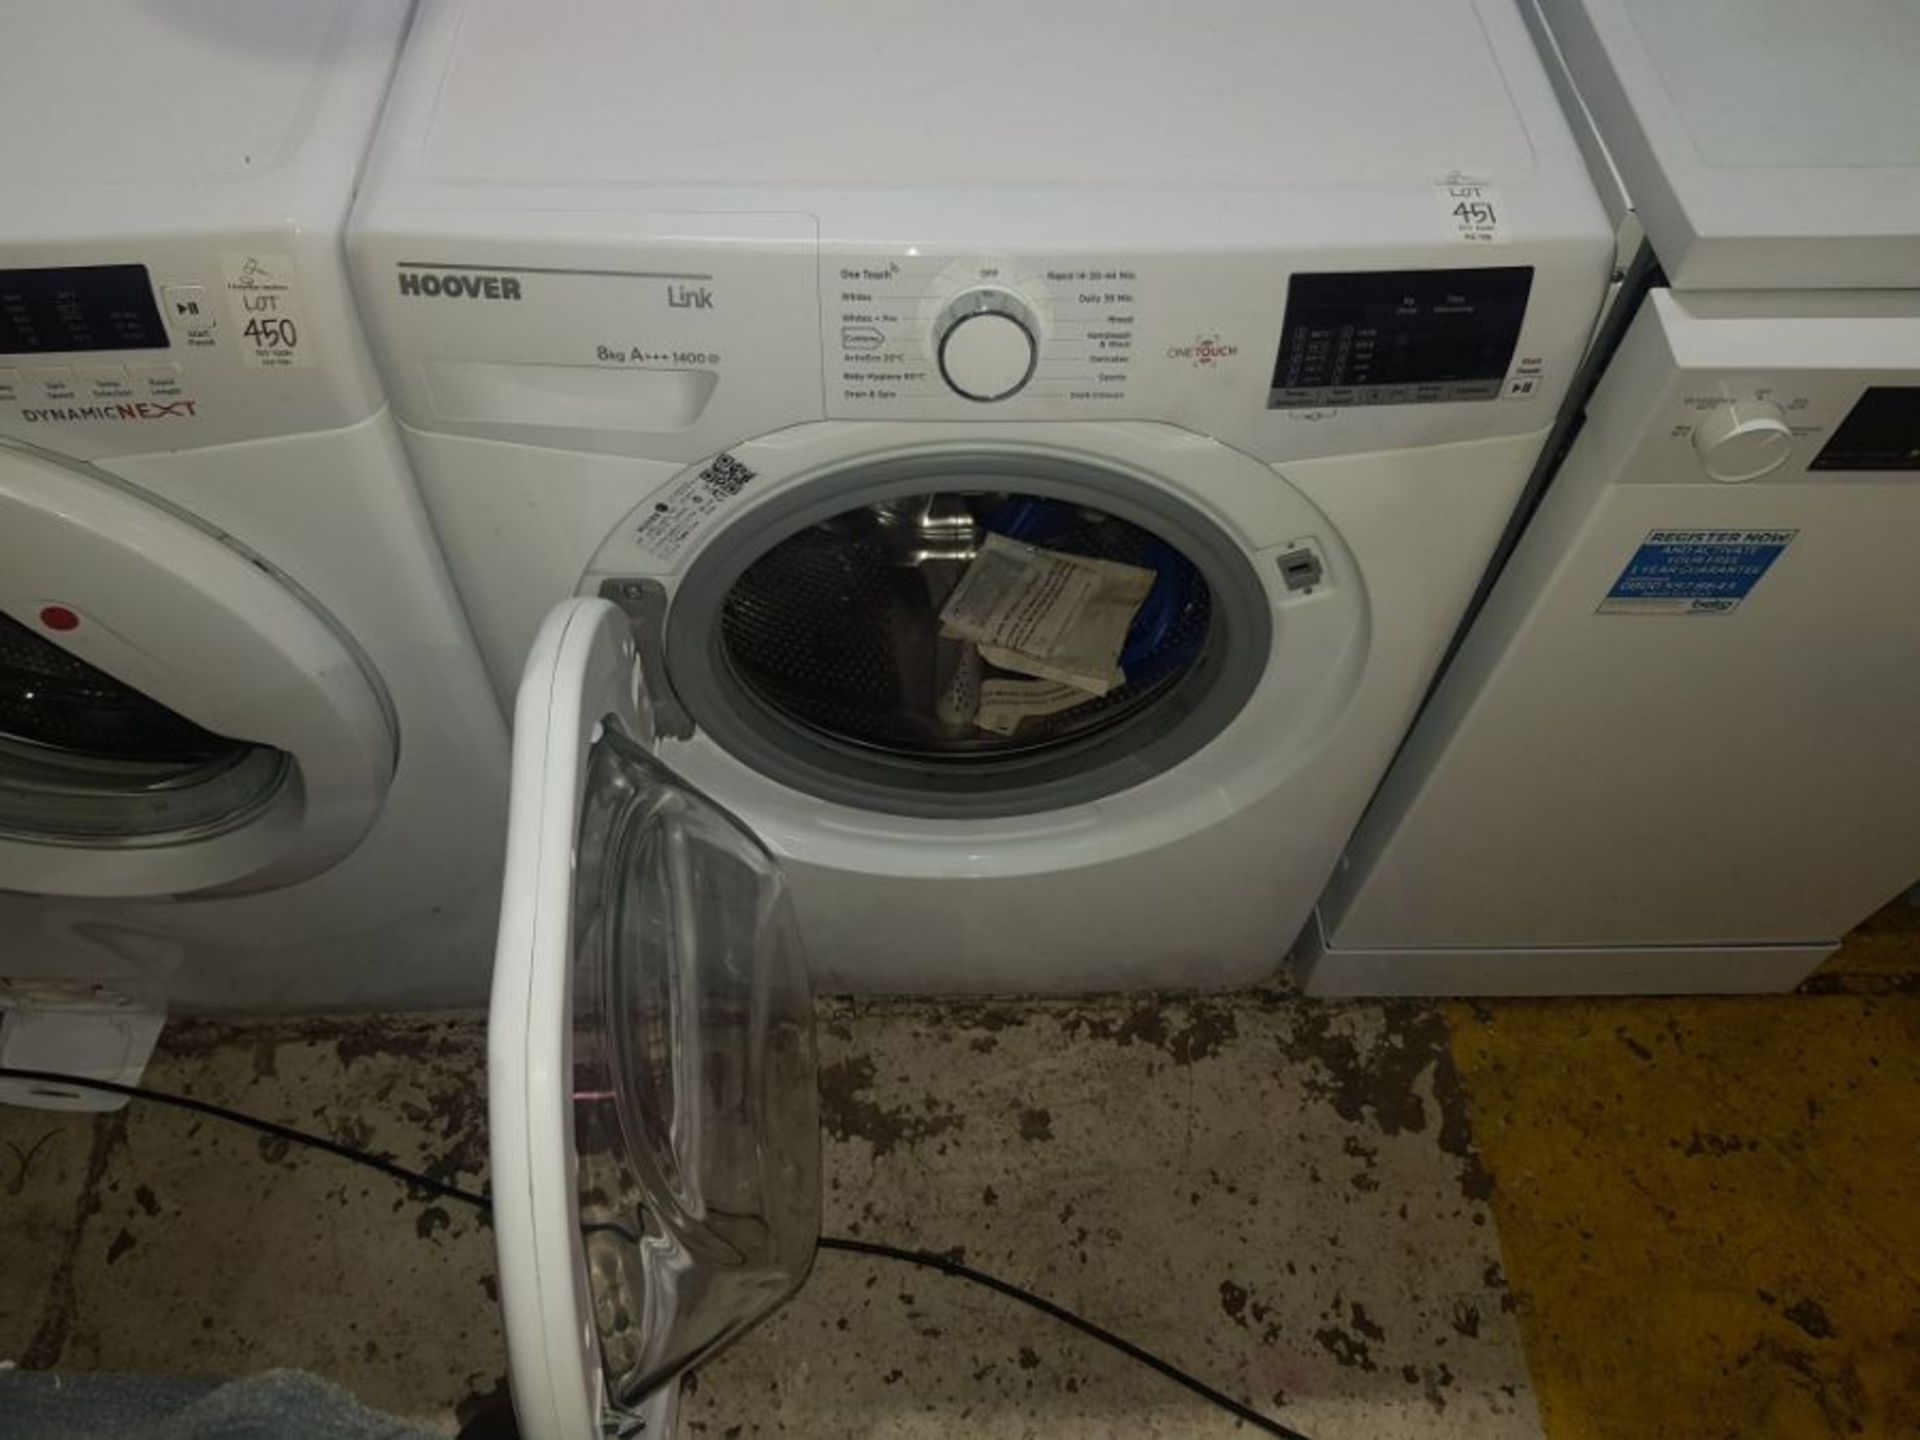 HOOVER LINK 8KG 1400RPM WASHING MACHINE (VAT TO BE ADDED TO HAMMER PRICE) - Image 3 of 4